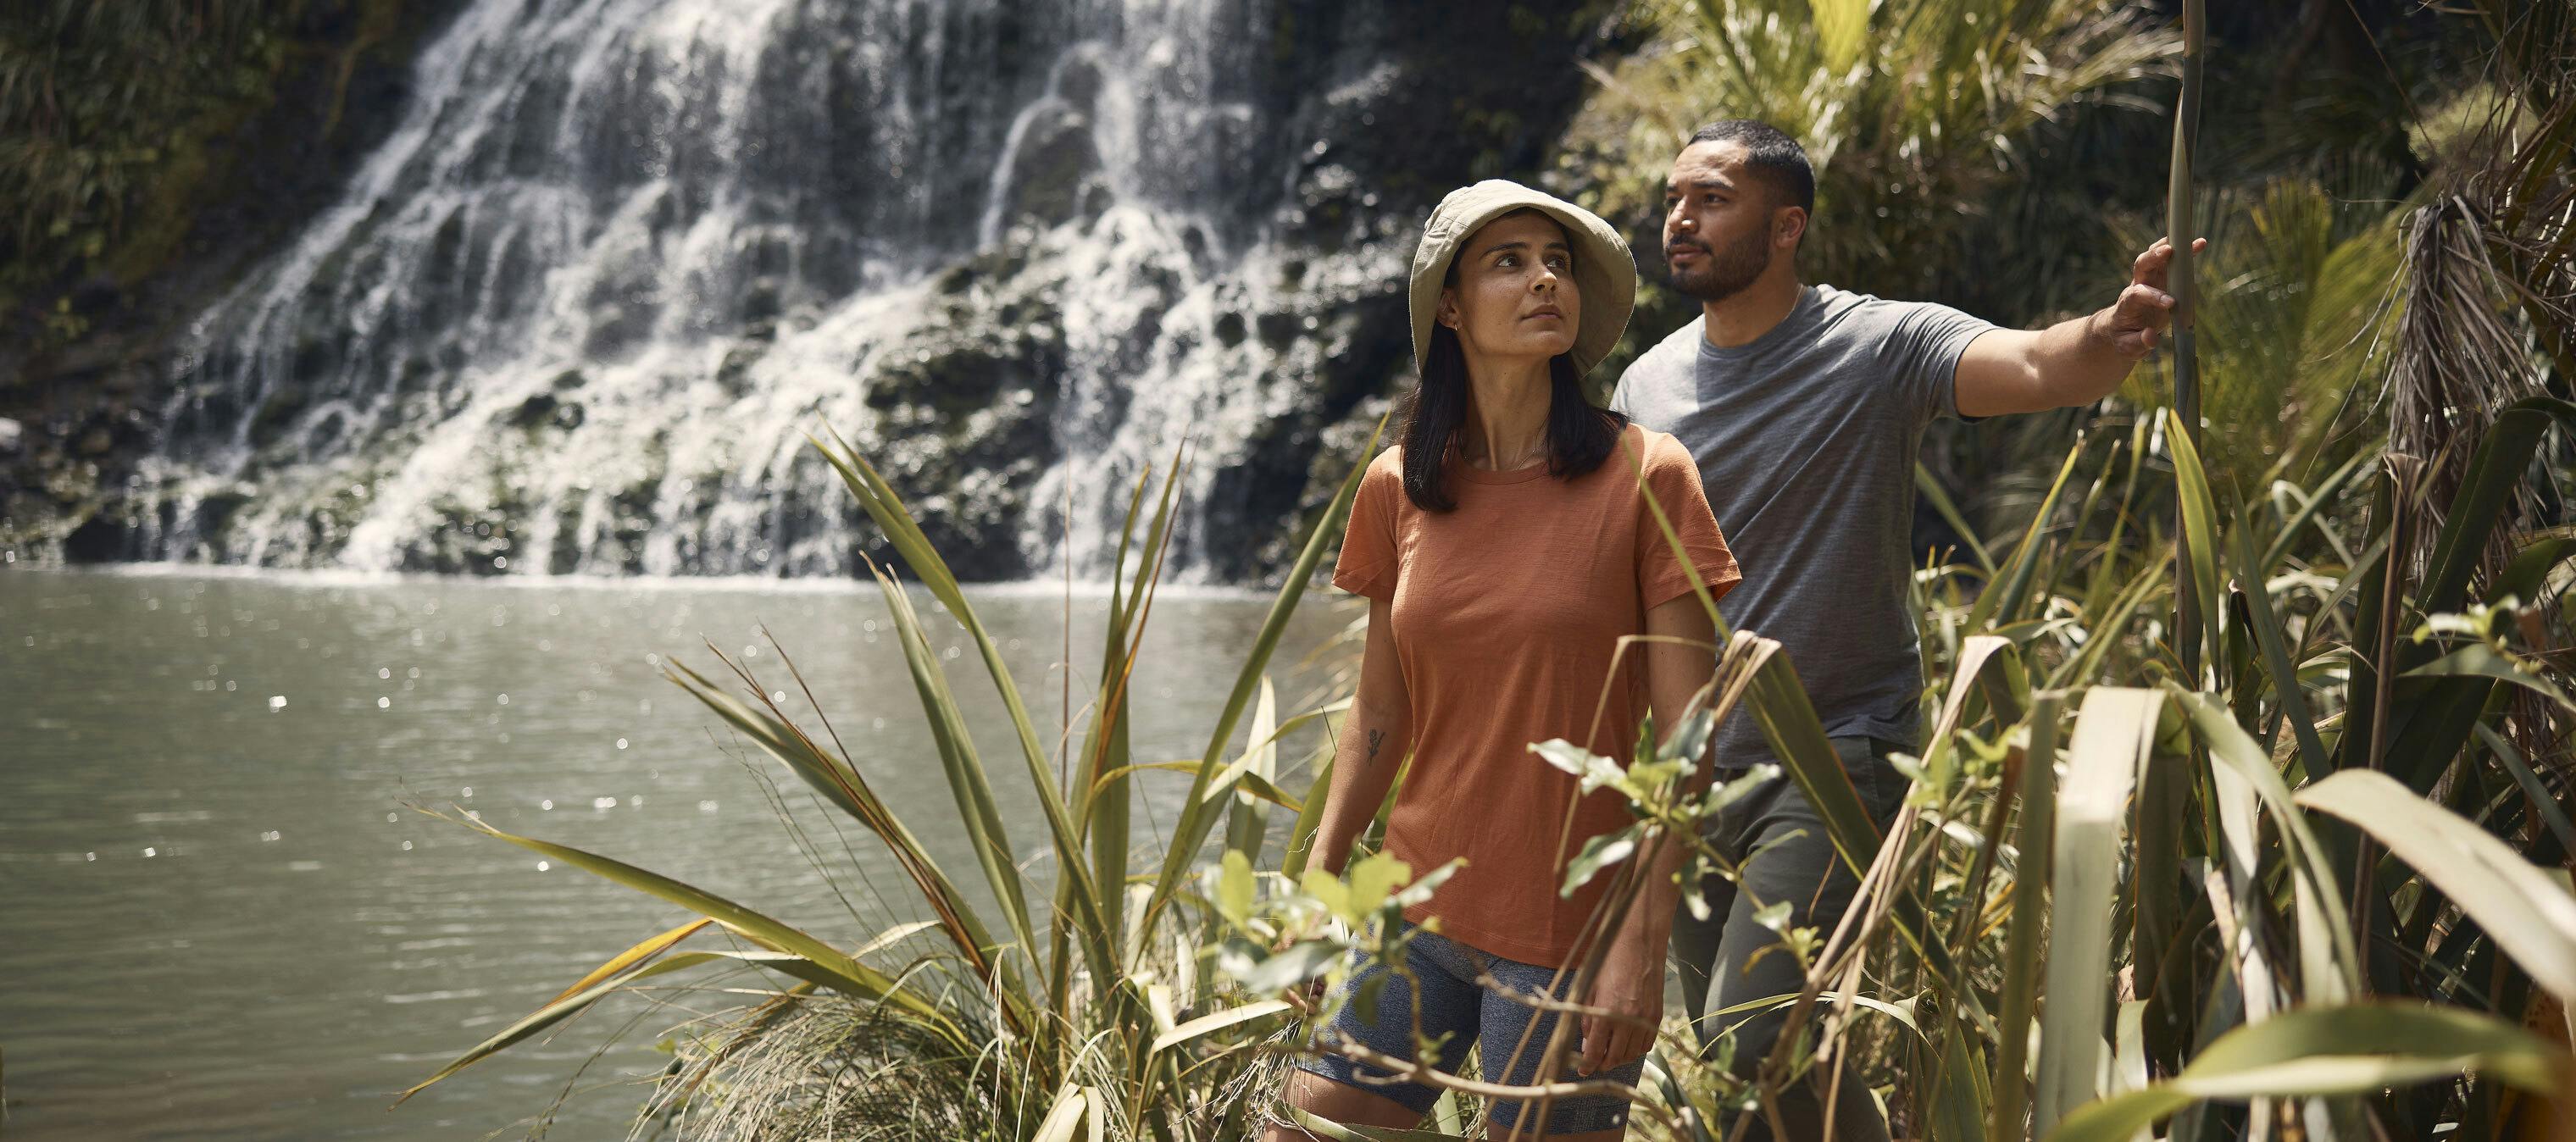 a man and woman doing what they love: exploring nature around a beautiful waterfall